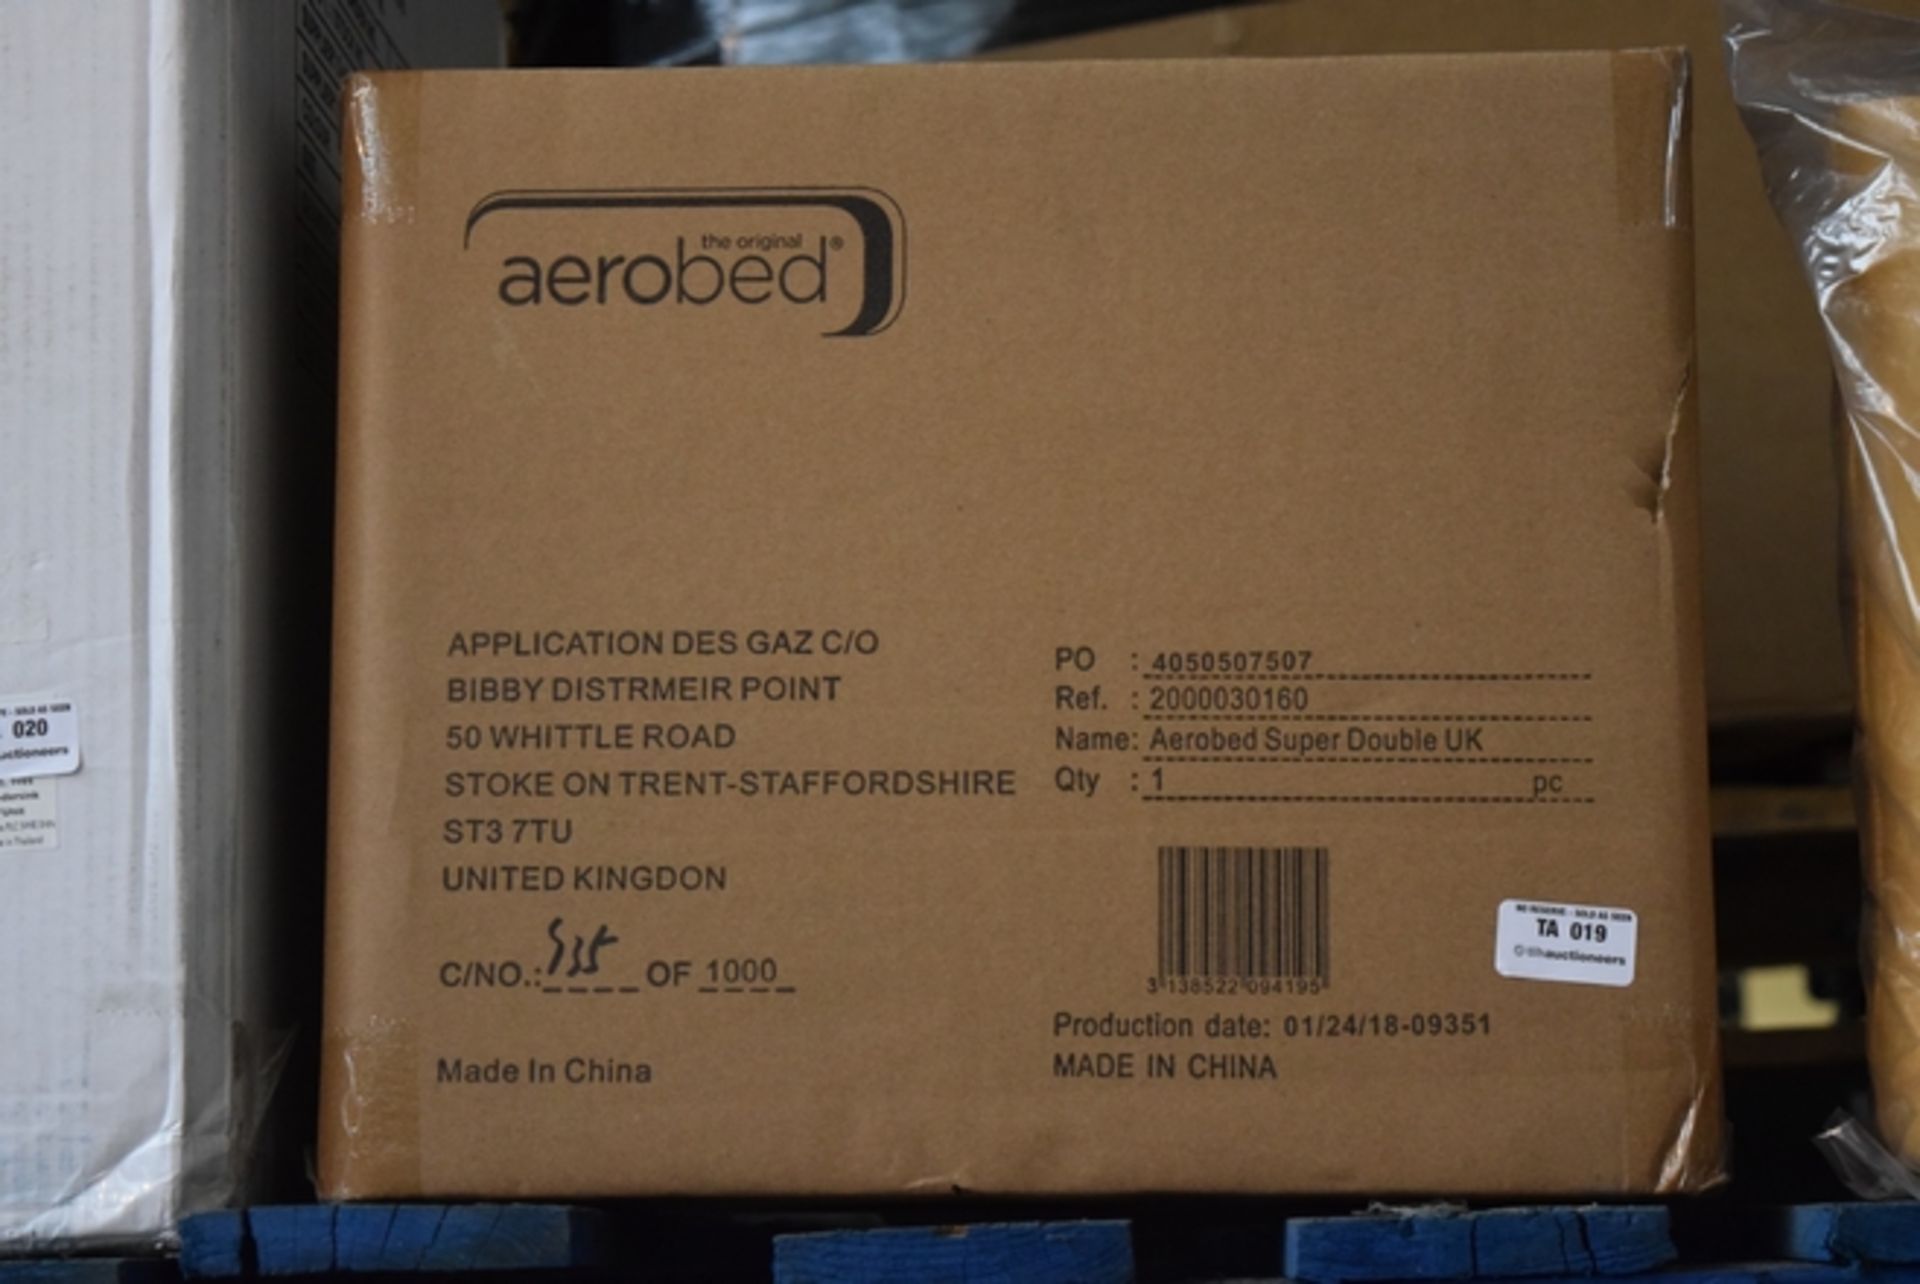 1X BOXED THE ORIGINAL AERO BED SUPER DOUBLE RRP £90 (13.09.18) (2872709) (VIEWING AVAILABLE)